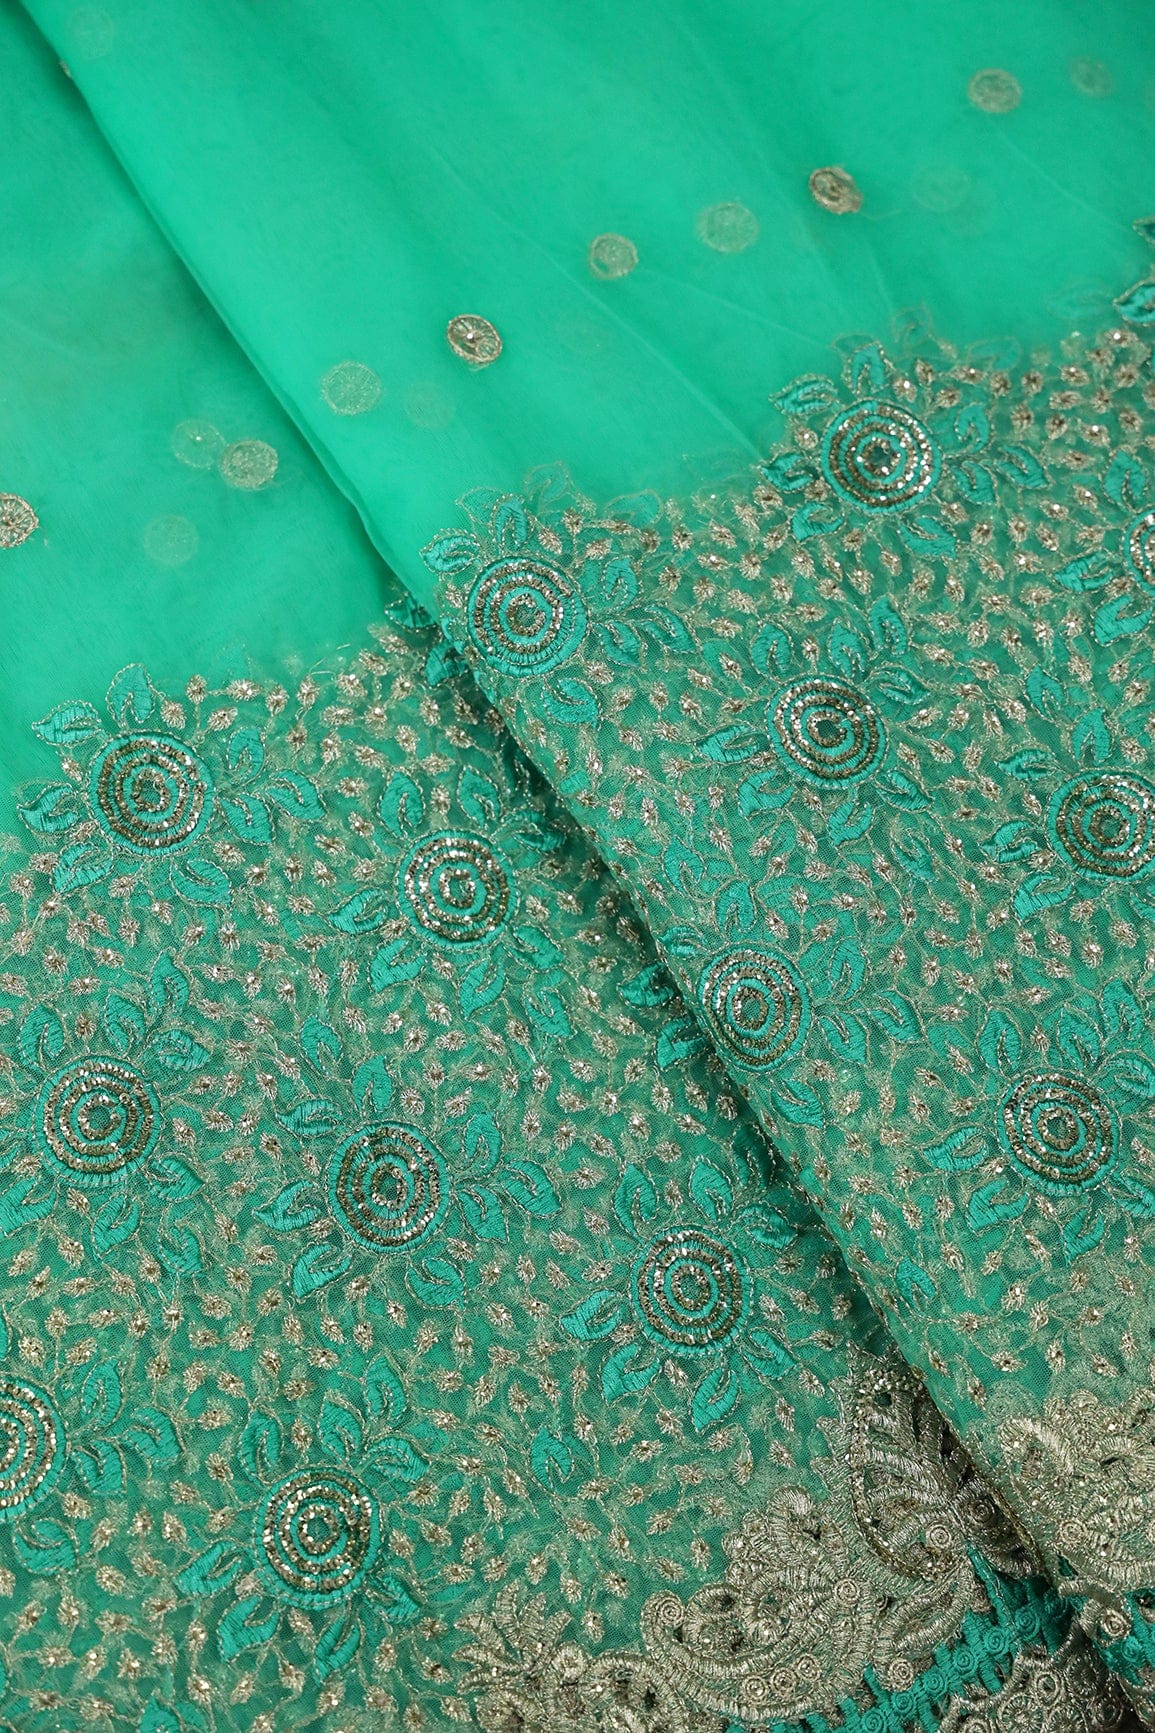 doeraa Embroidery Fabrics Big Width''56'' Mint Green Thread With Zari Floral Embroidery Work On Mint Green Soft Net Fabric With Border